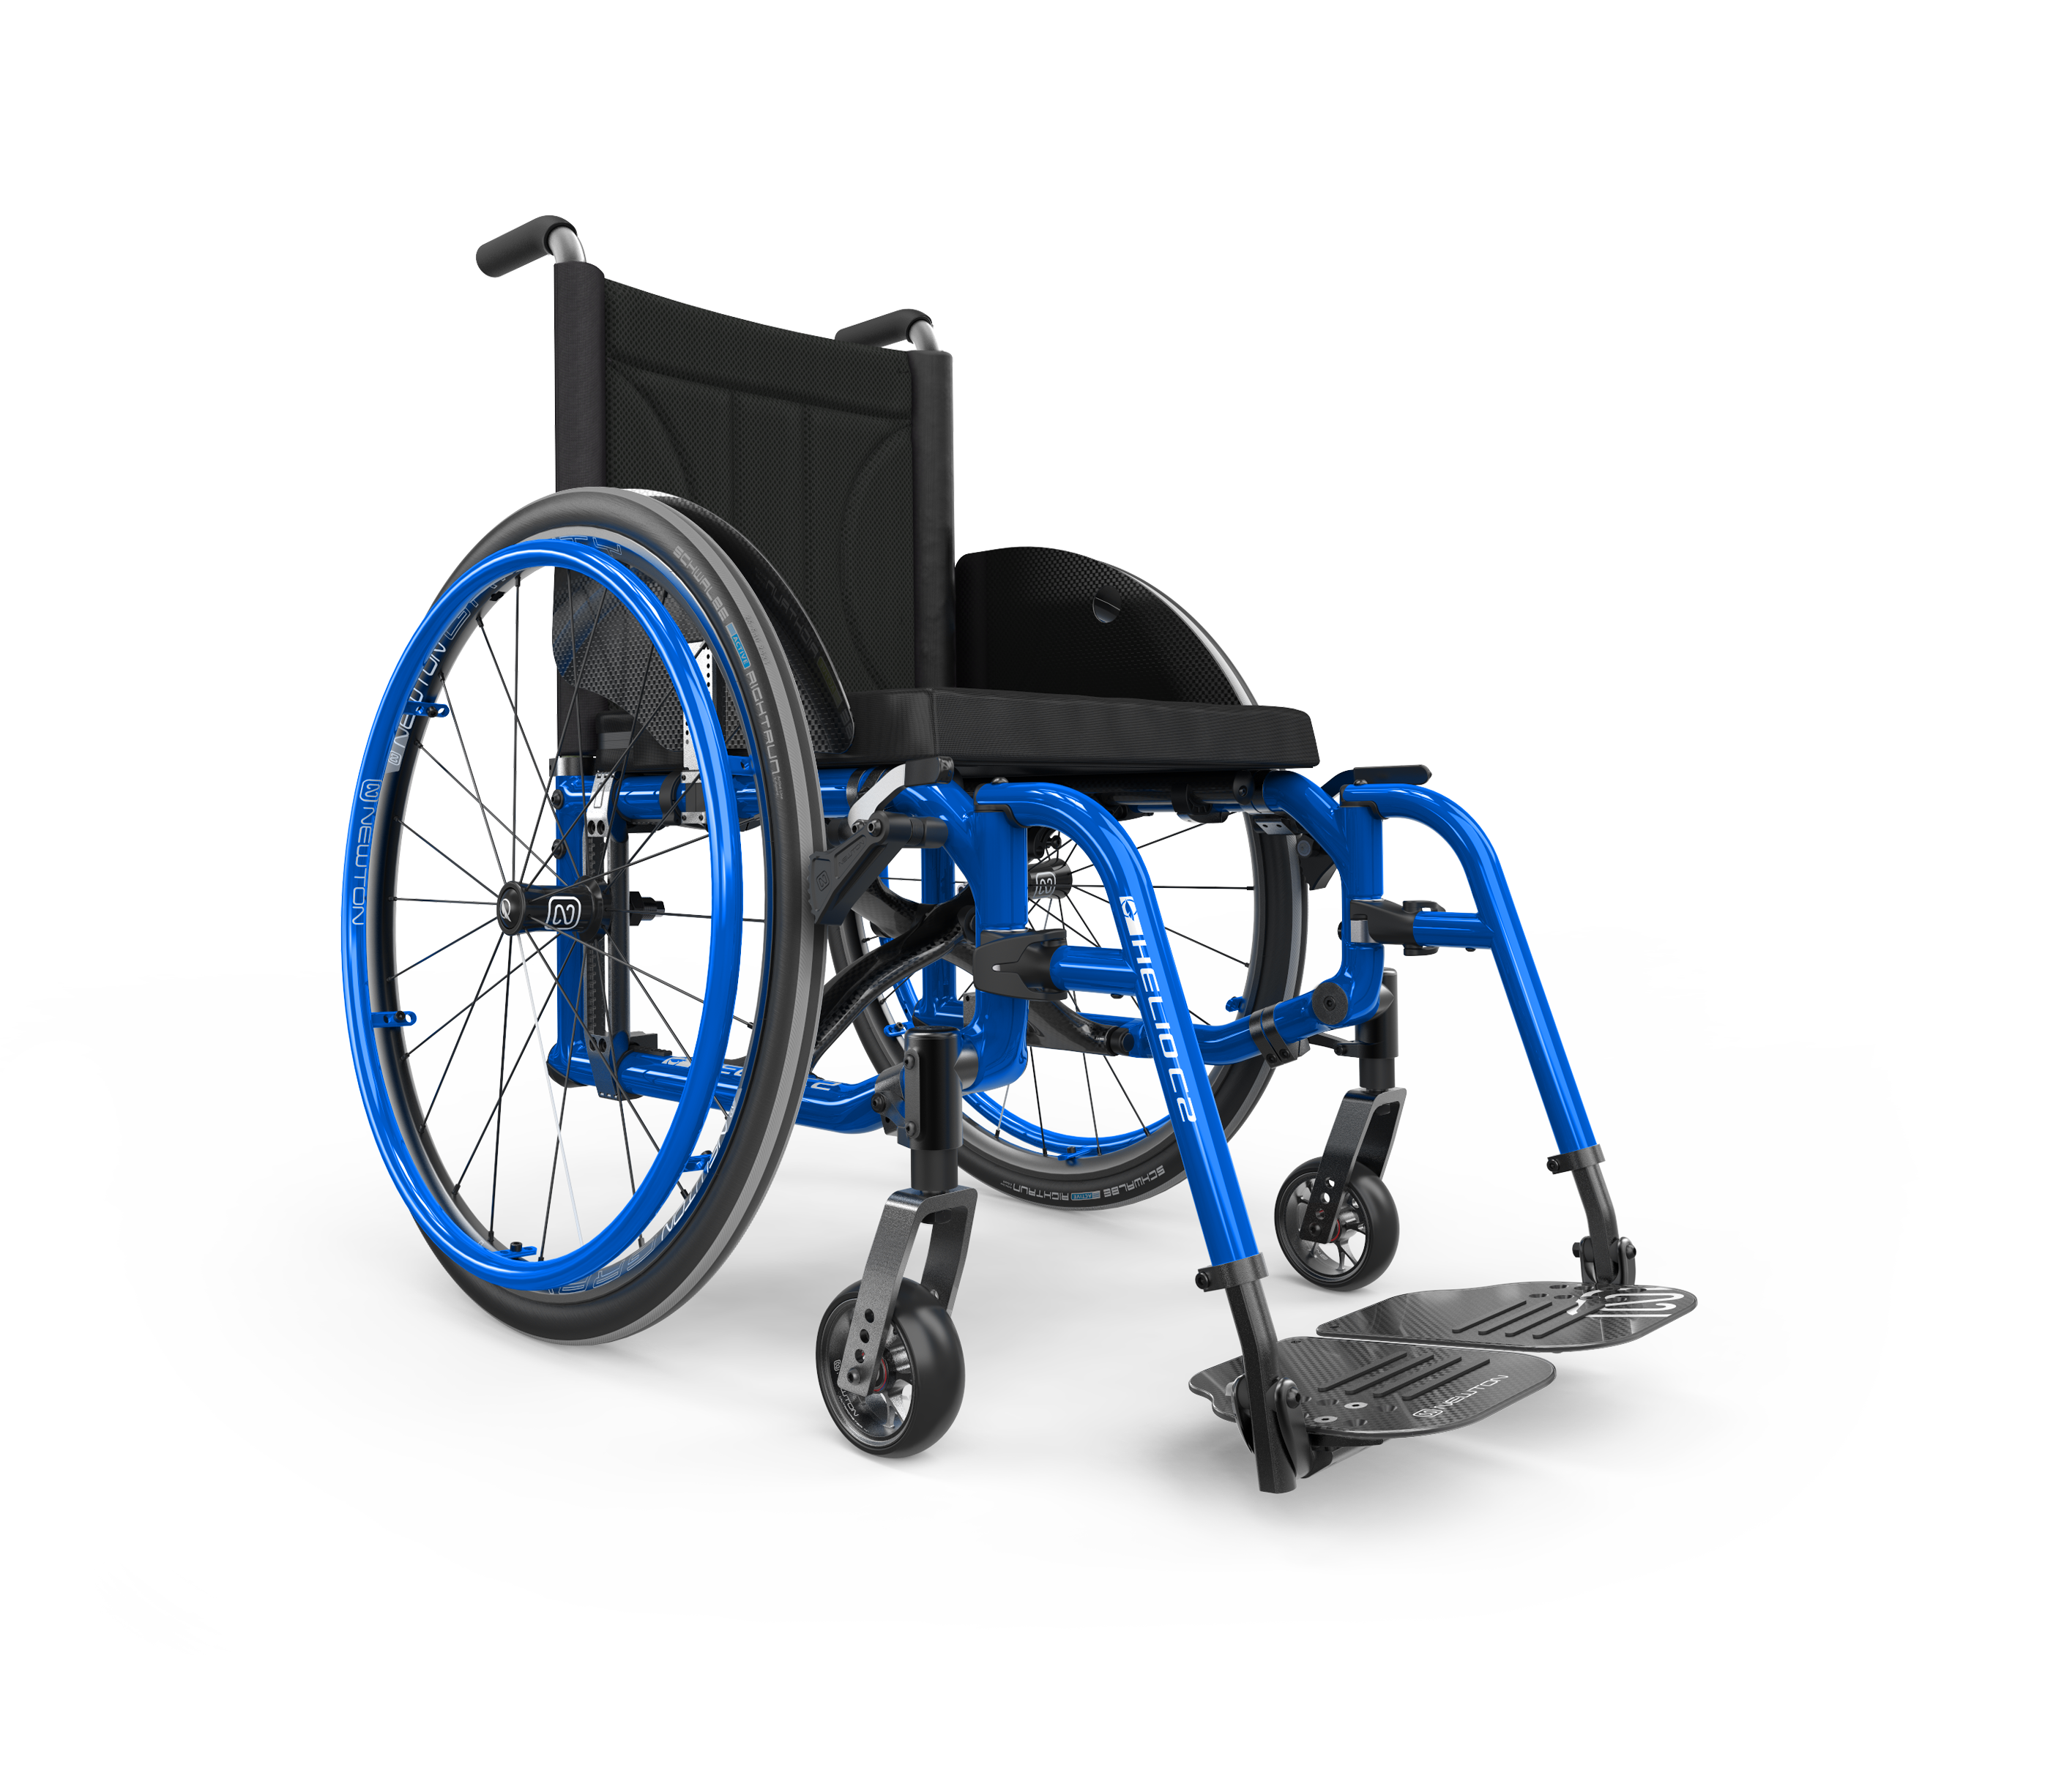 A Helio C2 lightweight folding wheelchair in blue is shown at an angle. It has spoke wheels, footrests and a padded backrest.